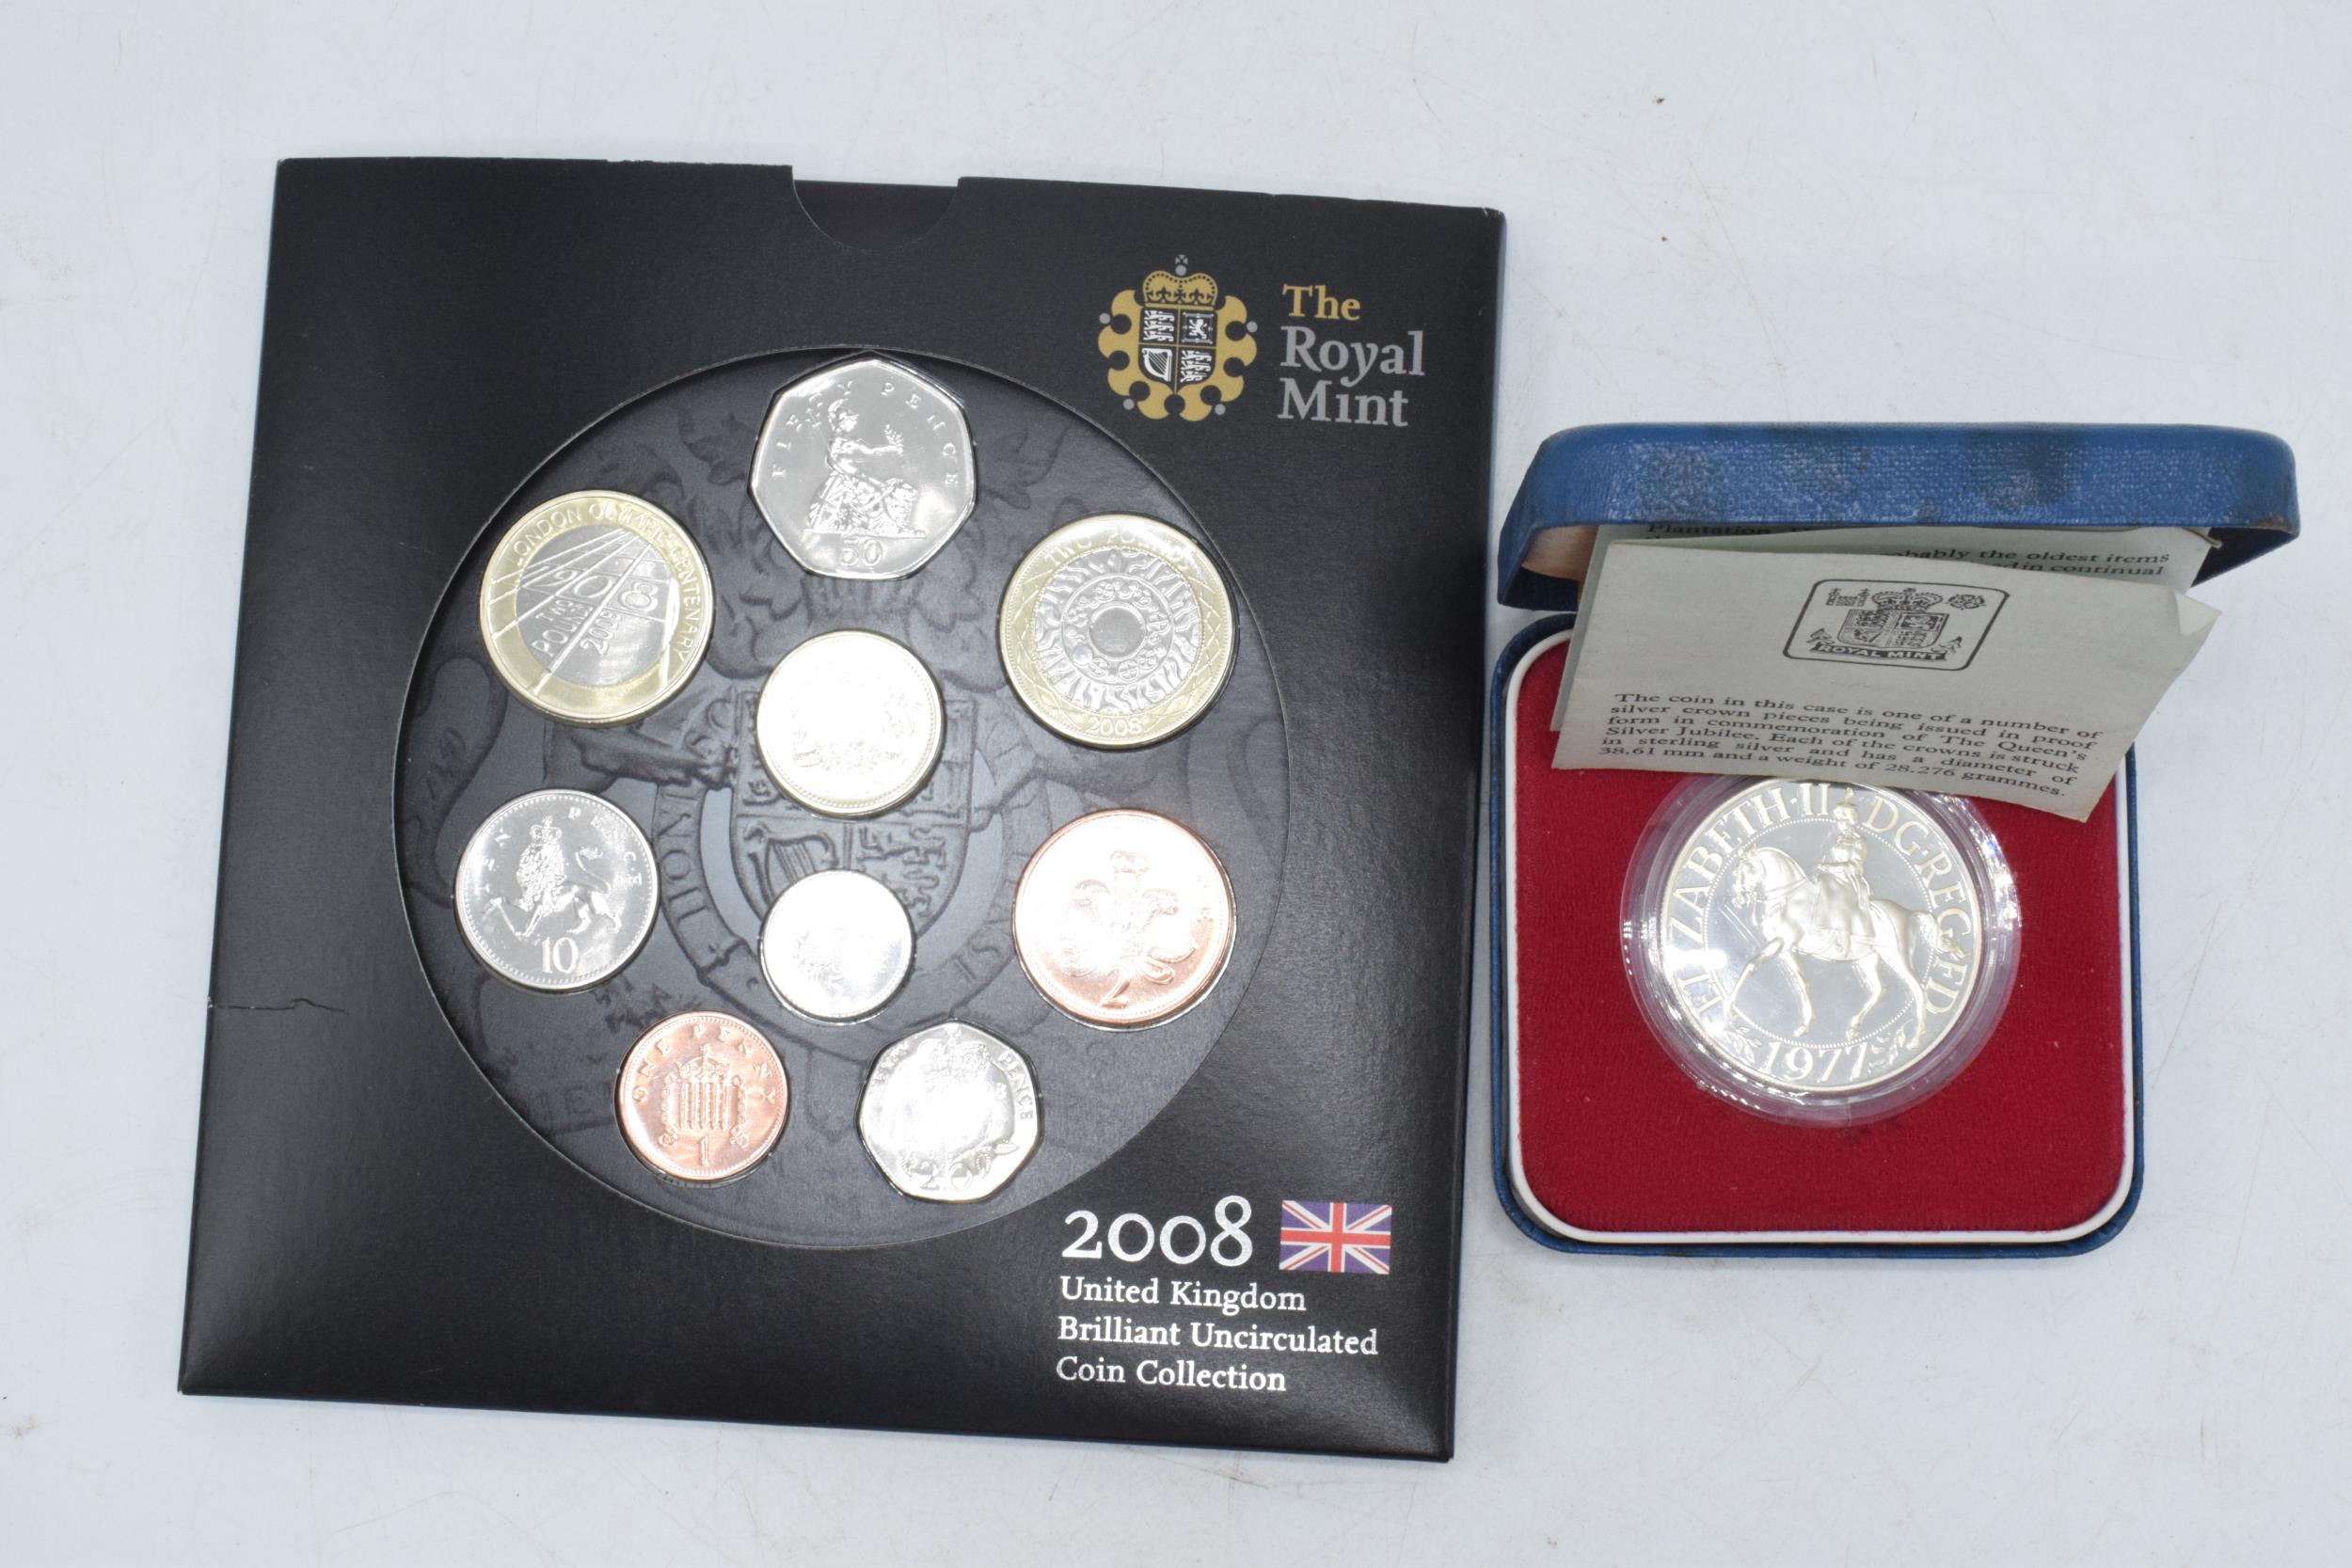 Boxed Royal Mint Elizabeth II Silver Proof crown together with 2008 UK Brilliant Uncirculated Coin - Image 2 of 3